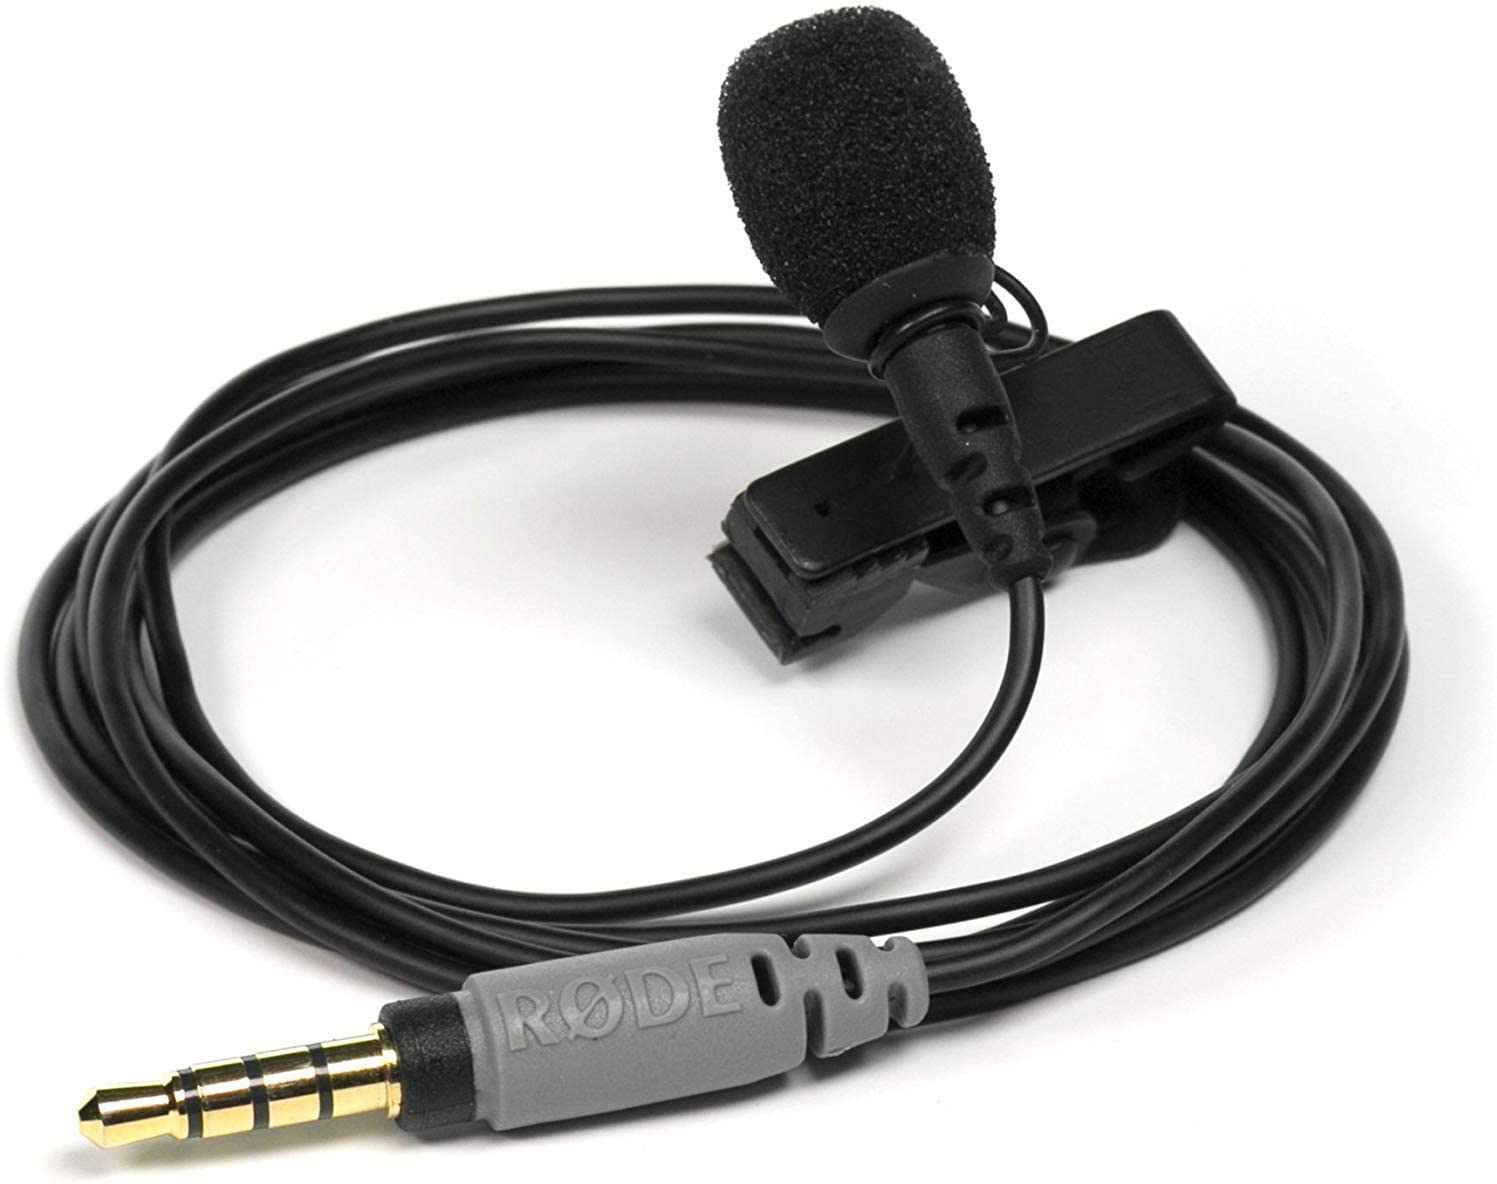 Rode-smartLav-Omni-directional-Wired-Lavalier-Microphone-for-iPhone-and-Smartphones